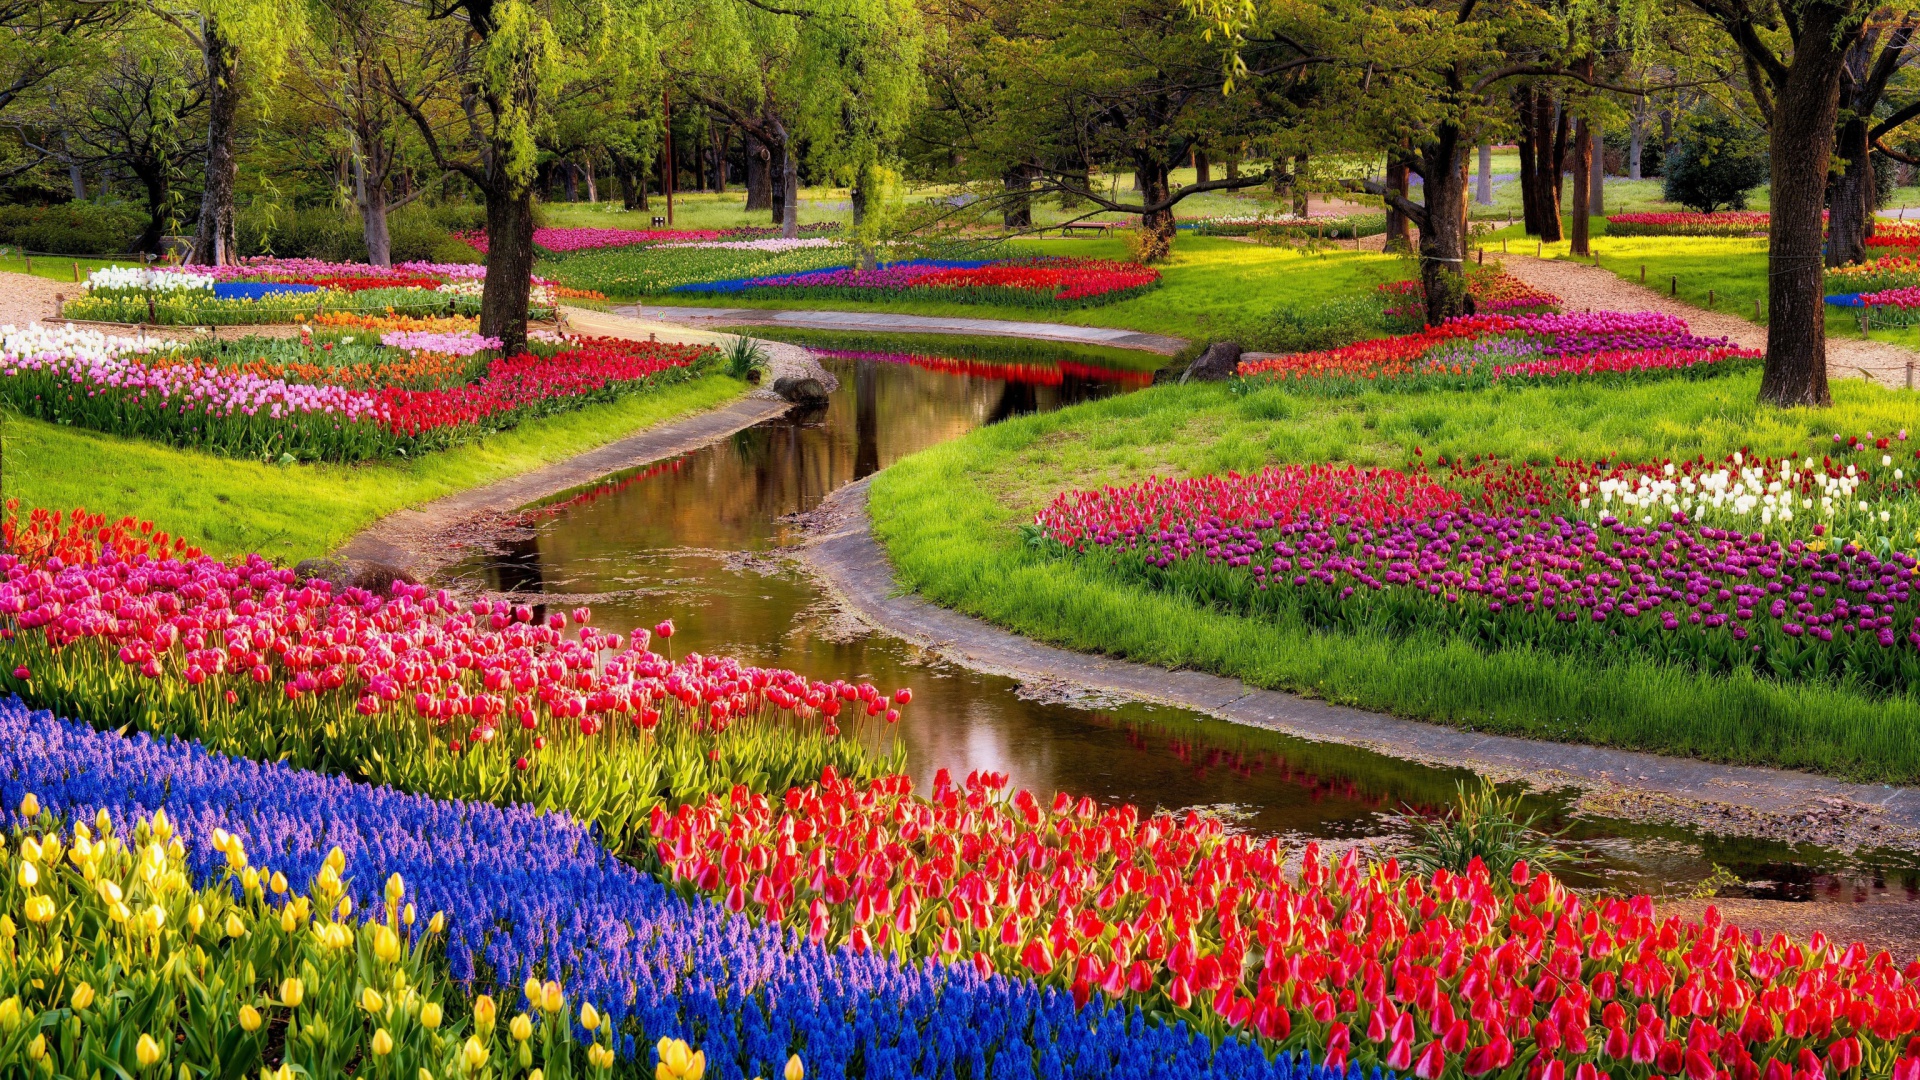 Tulips and Muscari Spring Park wallpaper 1920x1080